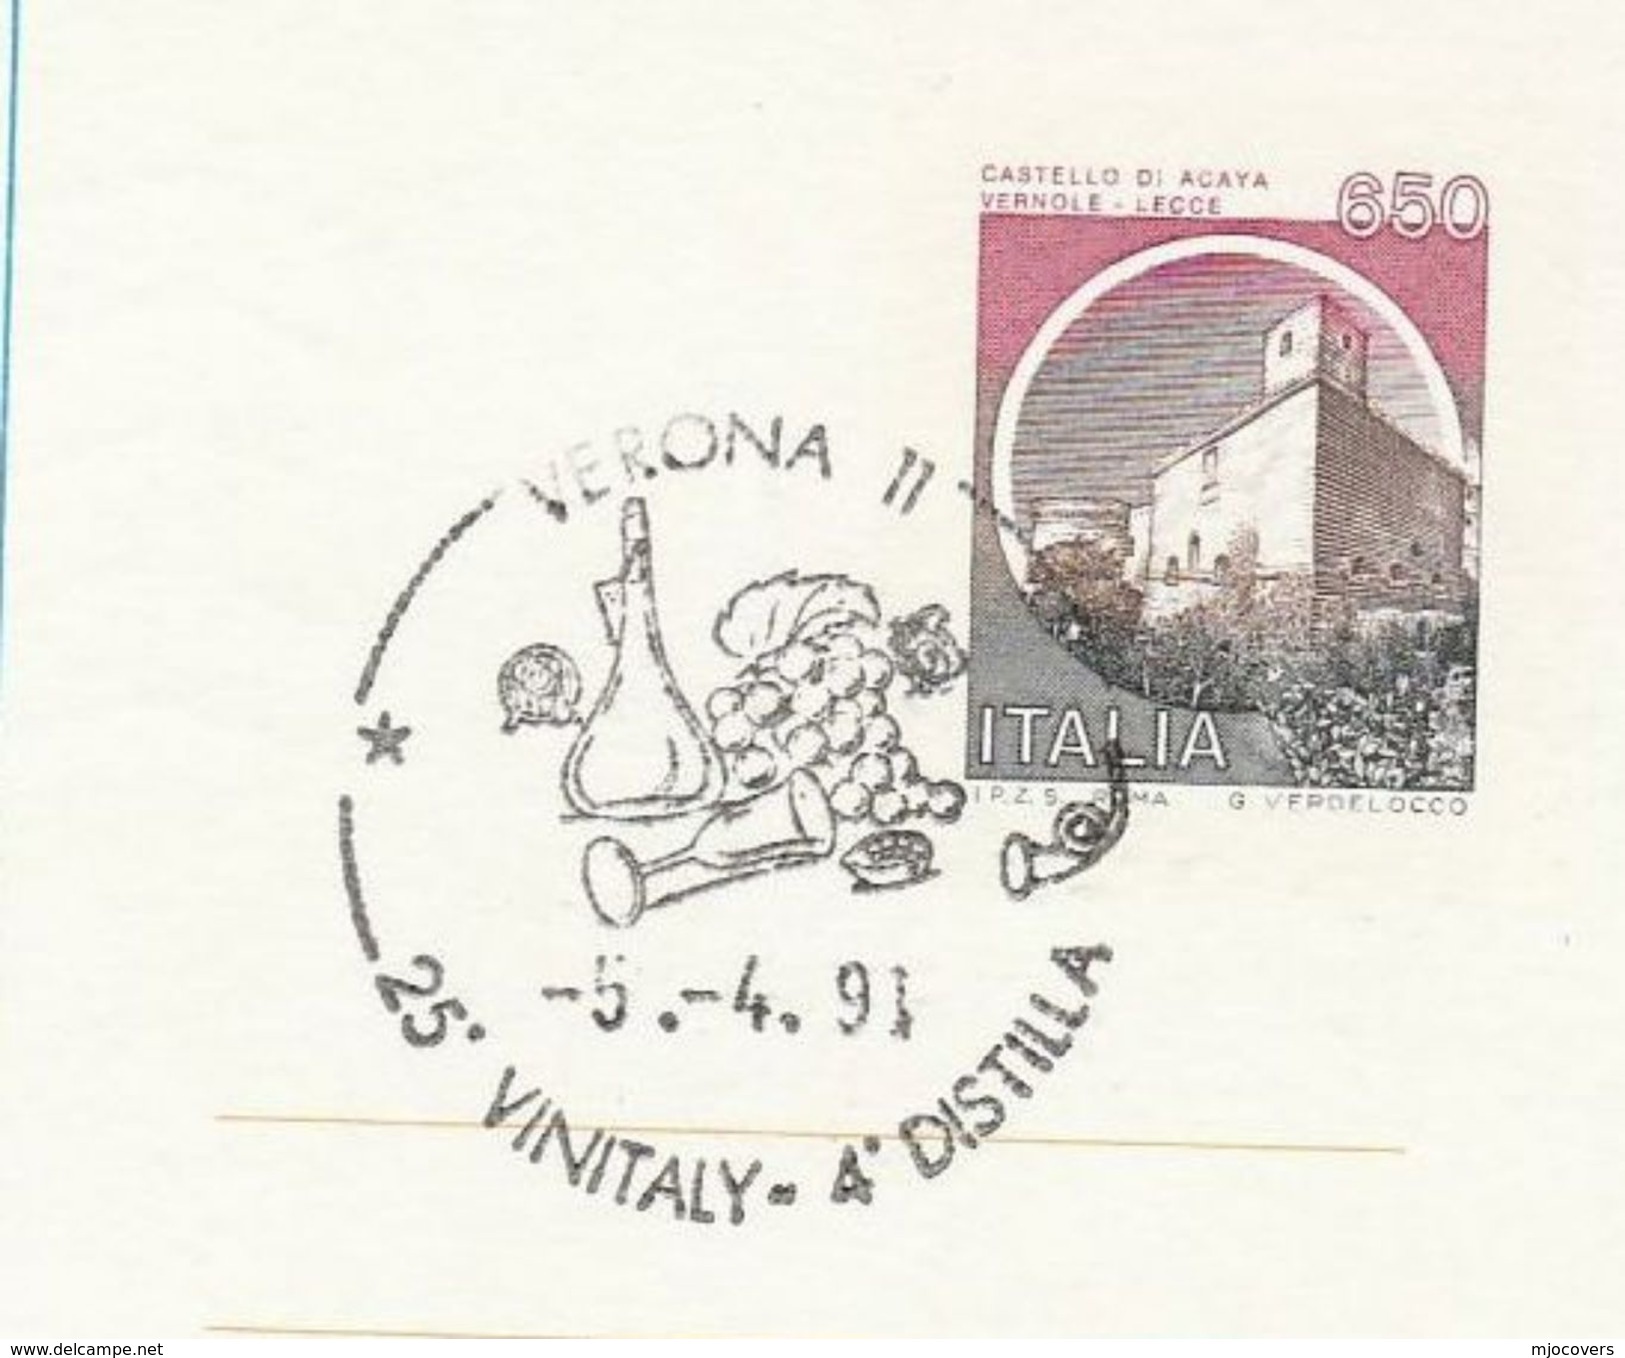 1991 Verona ITALY COVER EVENT Pmk VINITALY WINE EXHIBITION Alcohol Drink Grapes Postal Stationery Stamps - Wines & Alcohols